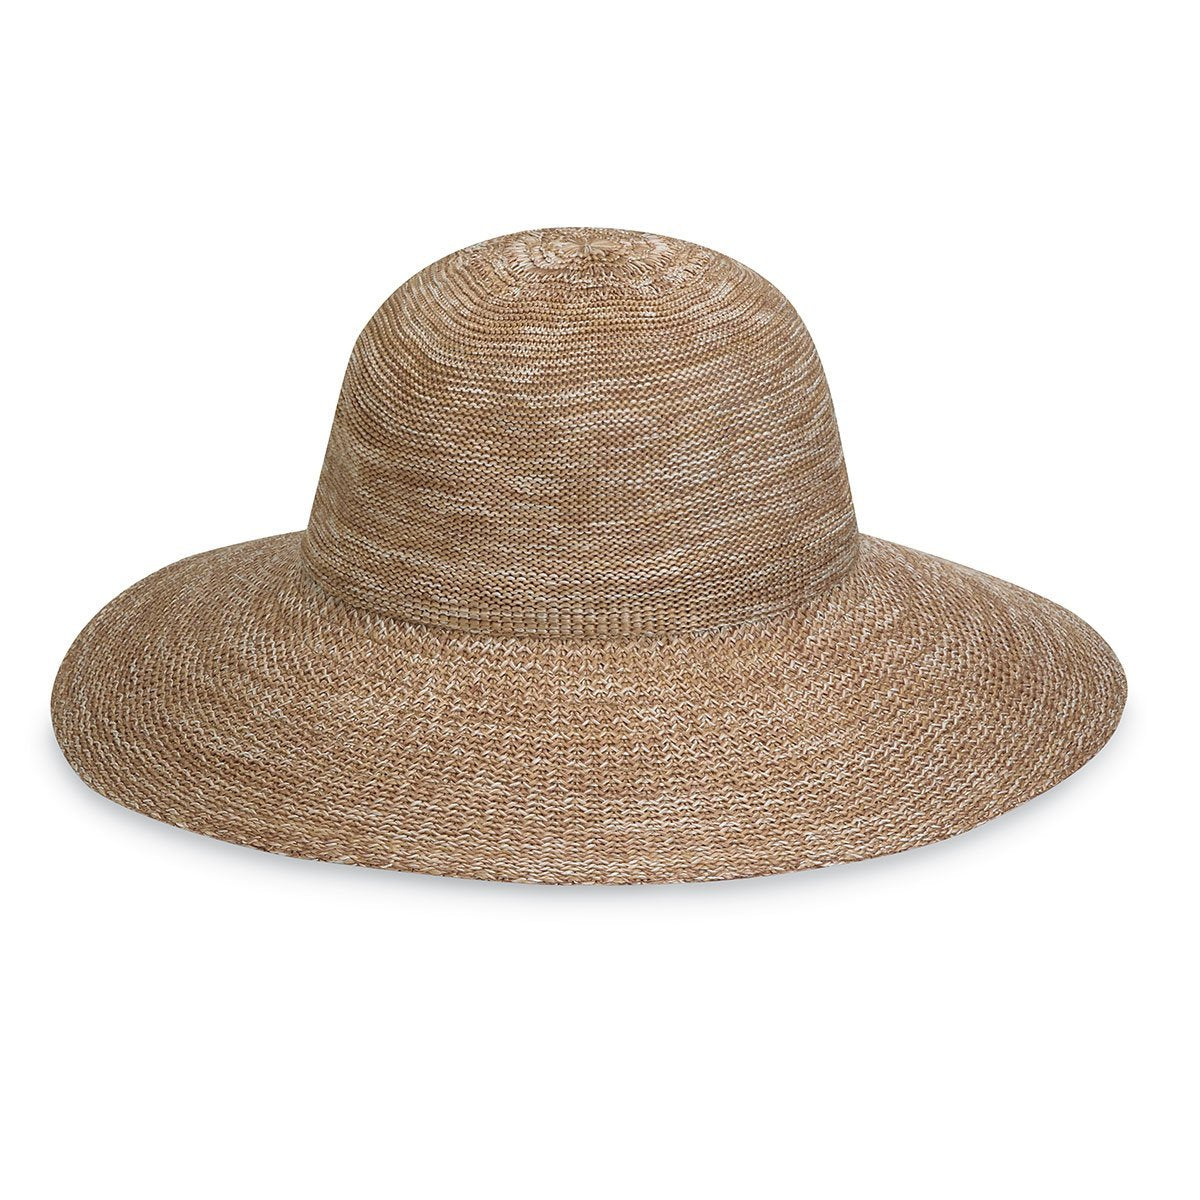 Featuring Women's Packable Big Wide Brim Victoria Diva straw Sun Hat in Mixed Camel from Wallaroo